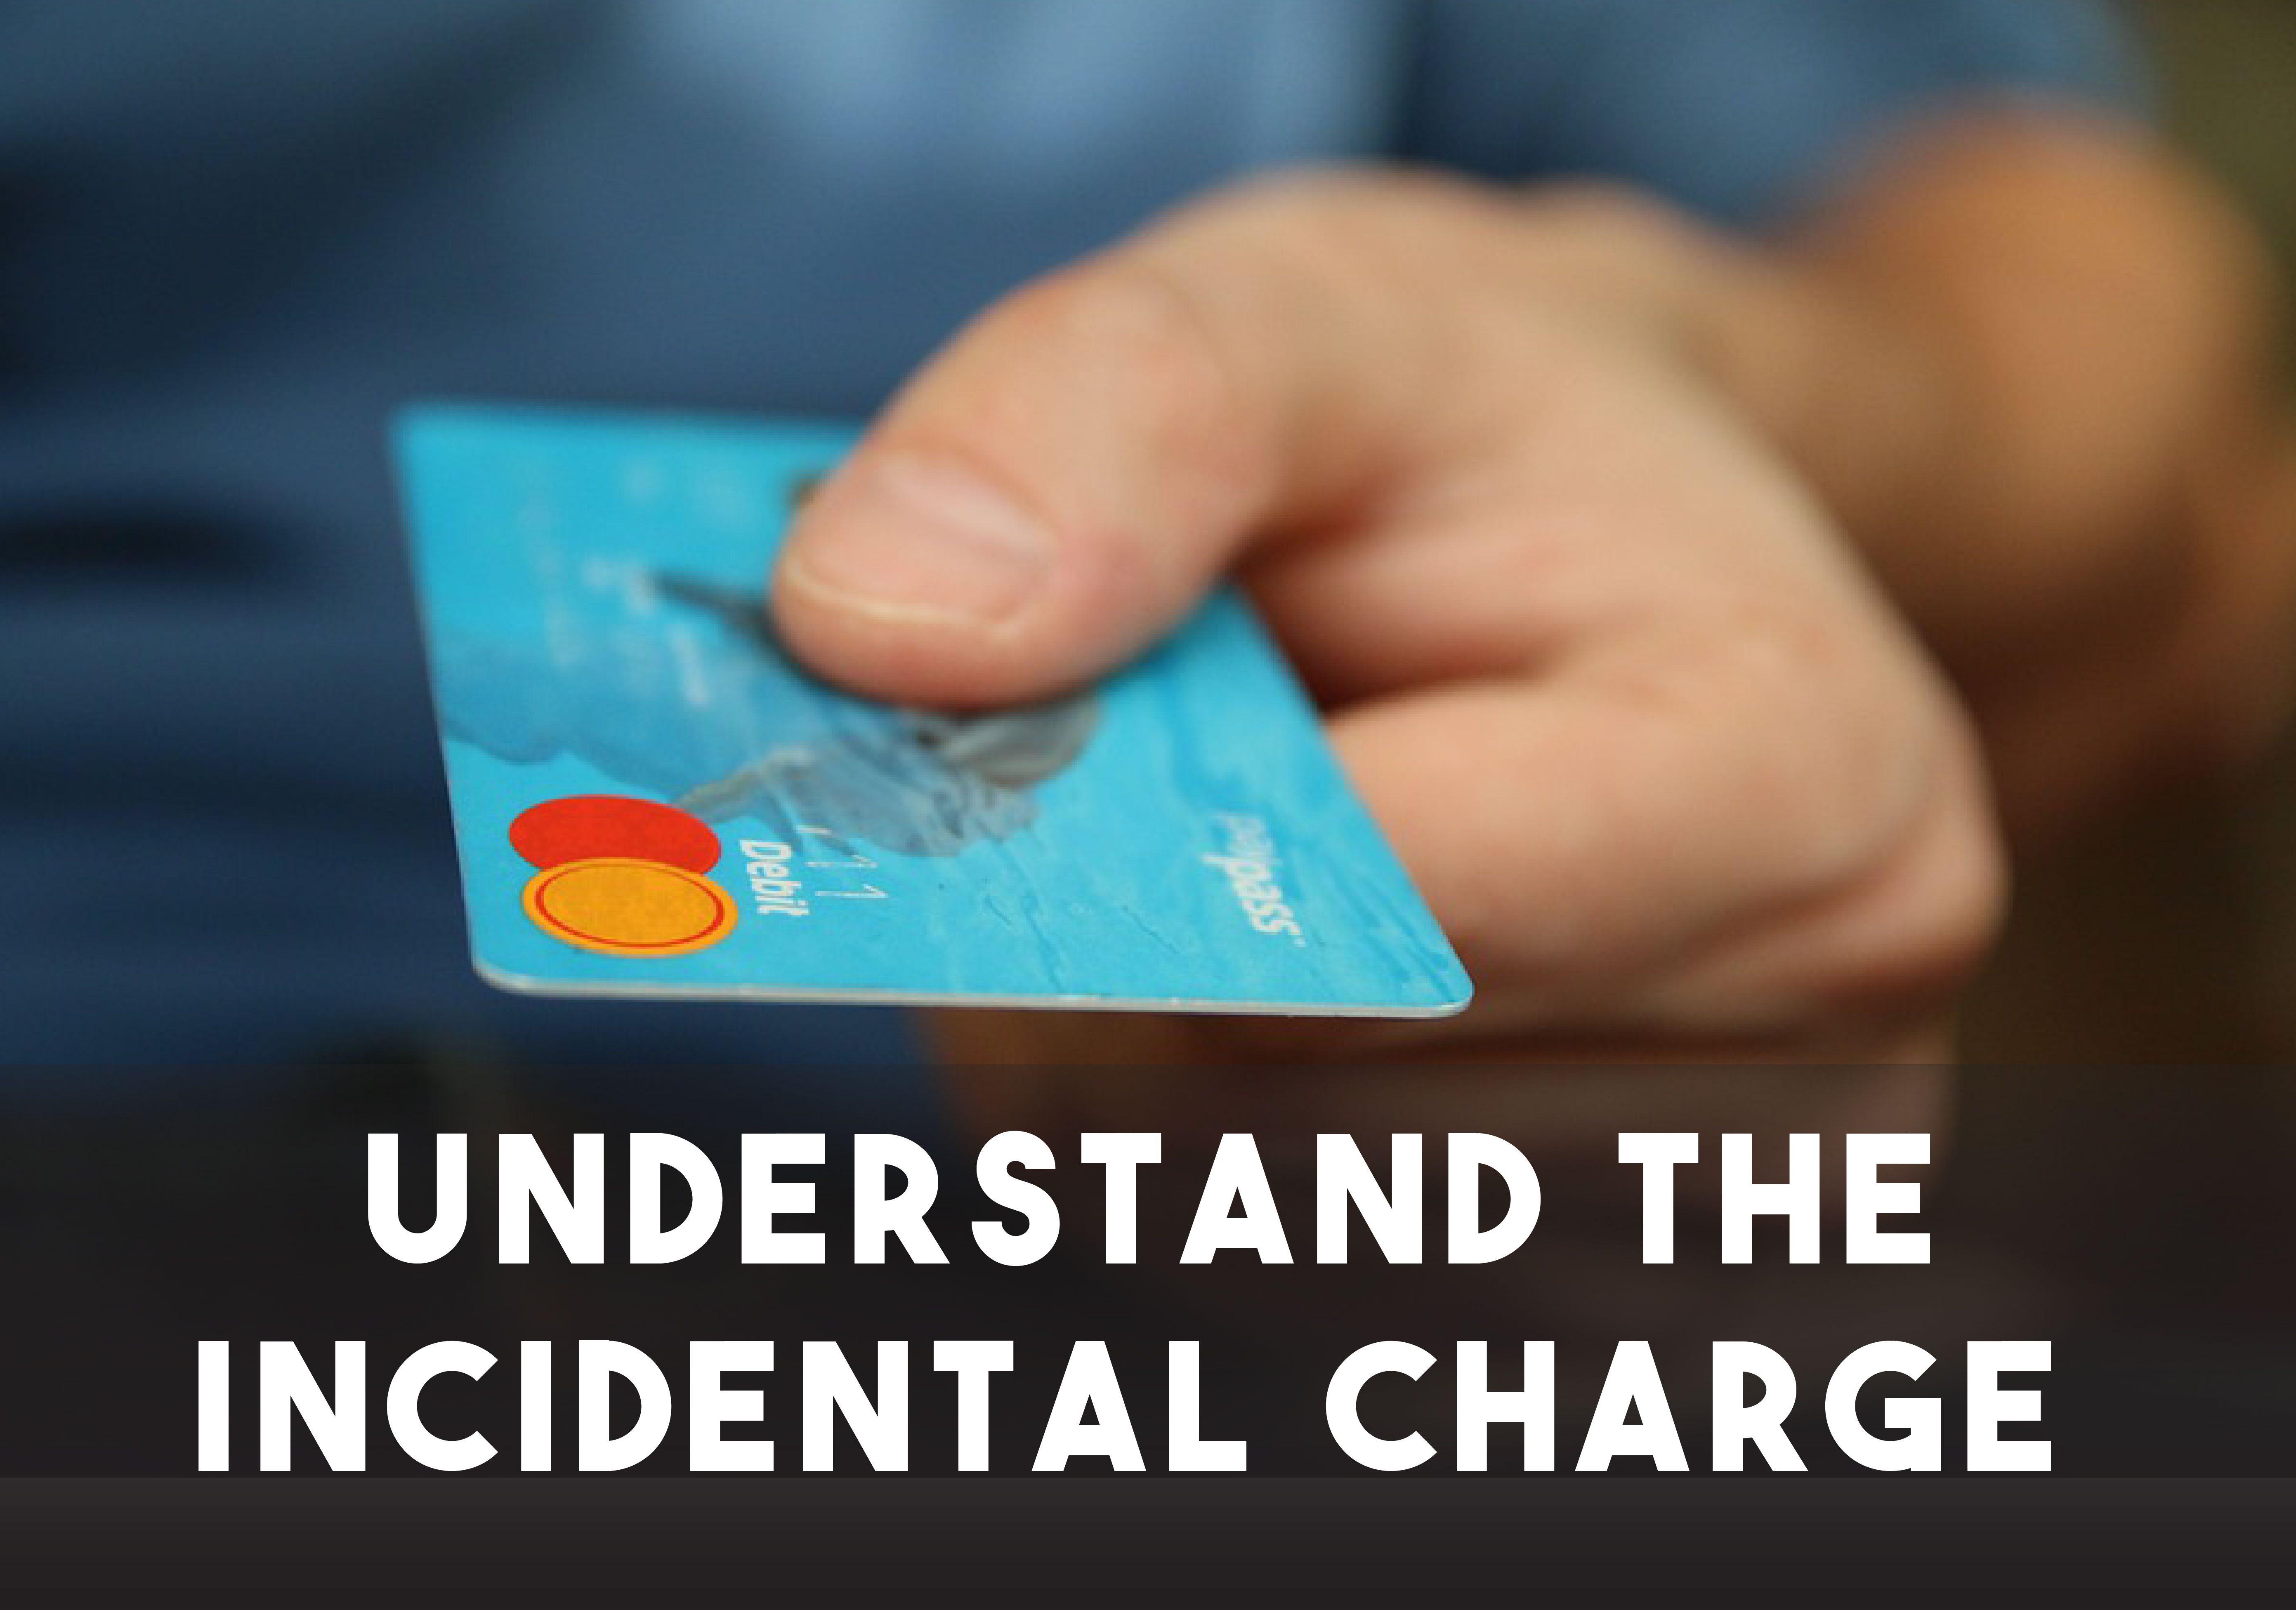 Understand the Incidental Charge